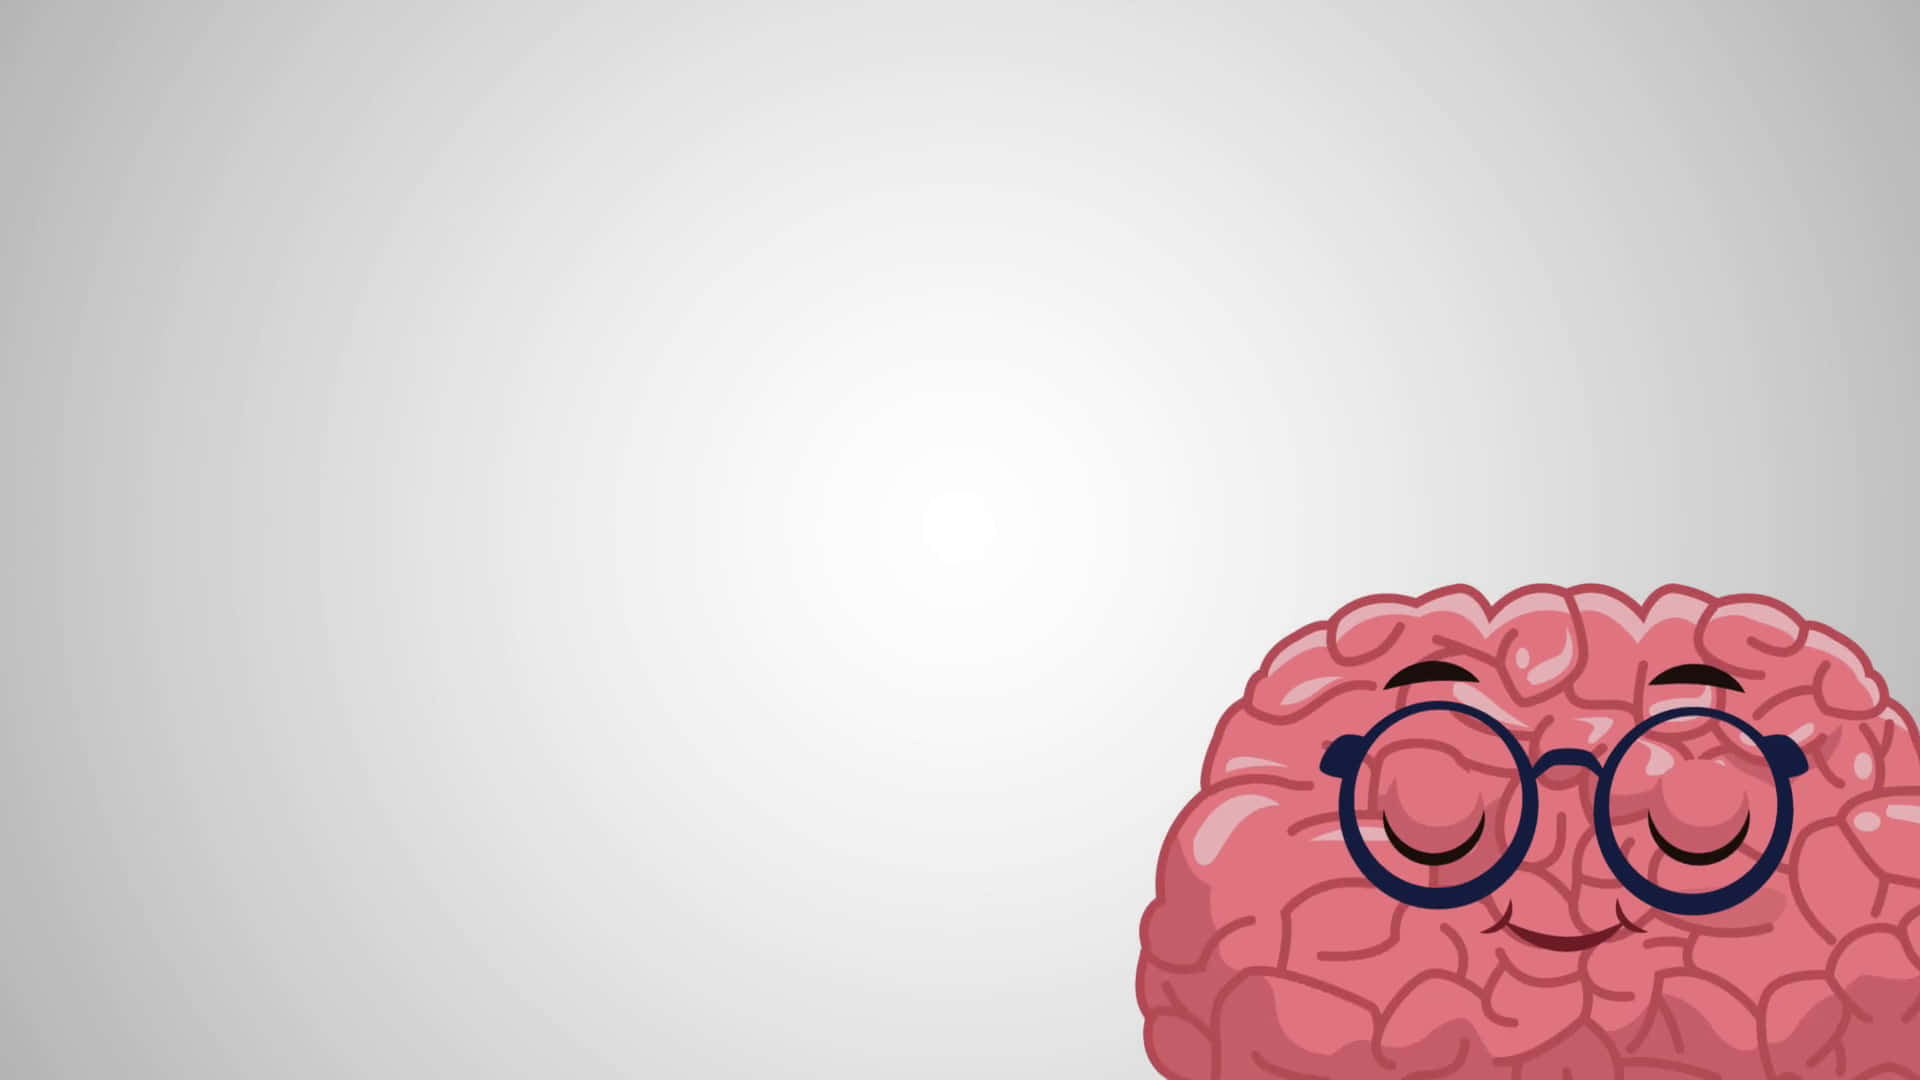 A Cartoon Brain With Glasses On A Gray Background